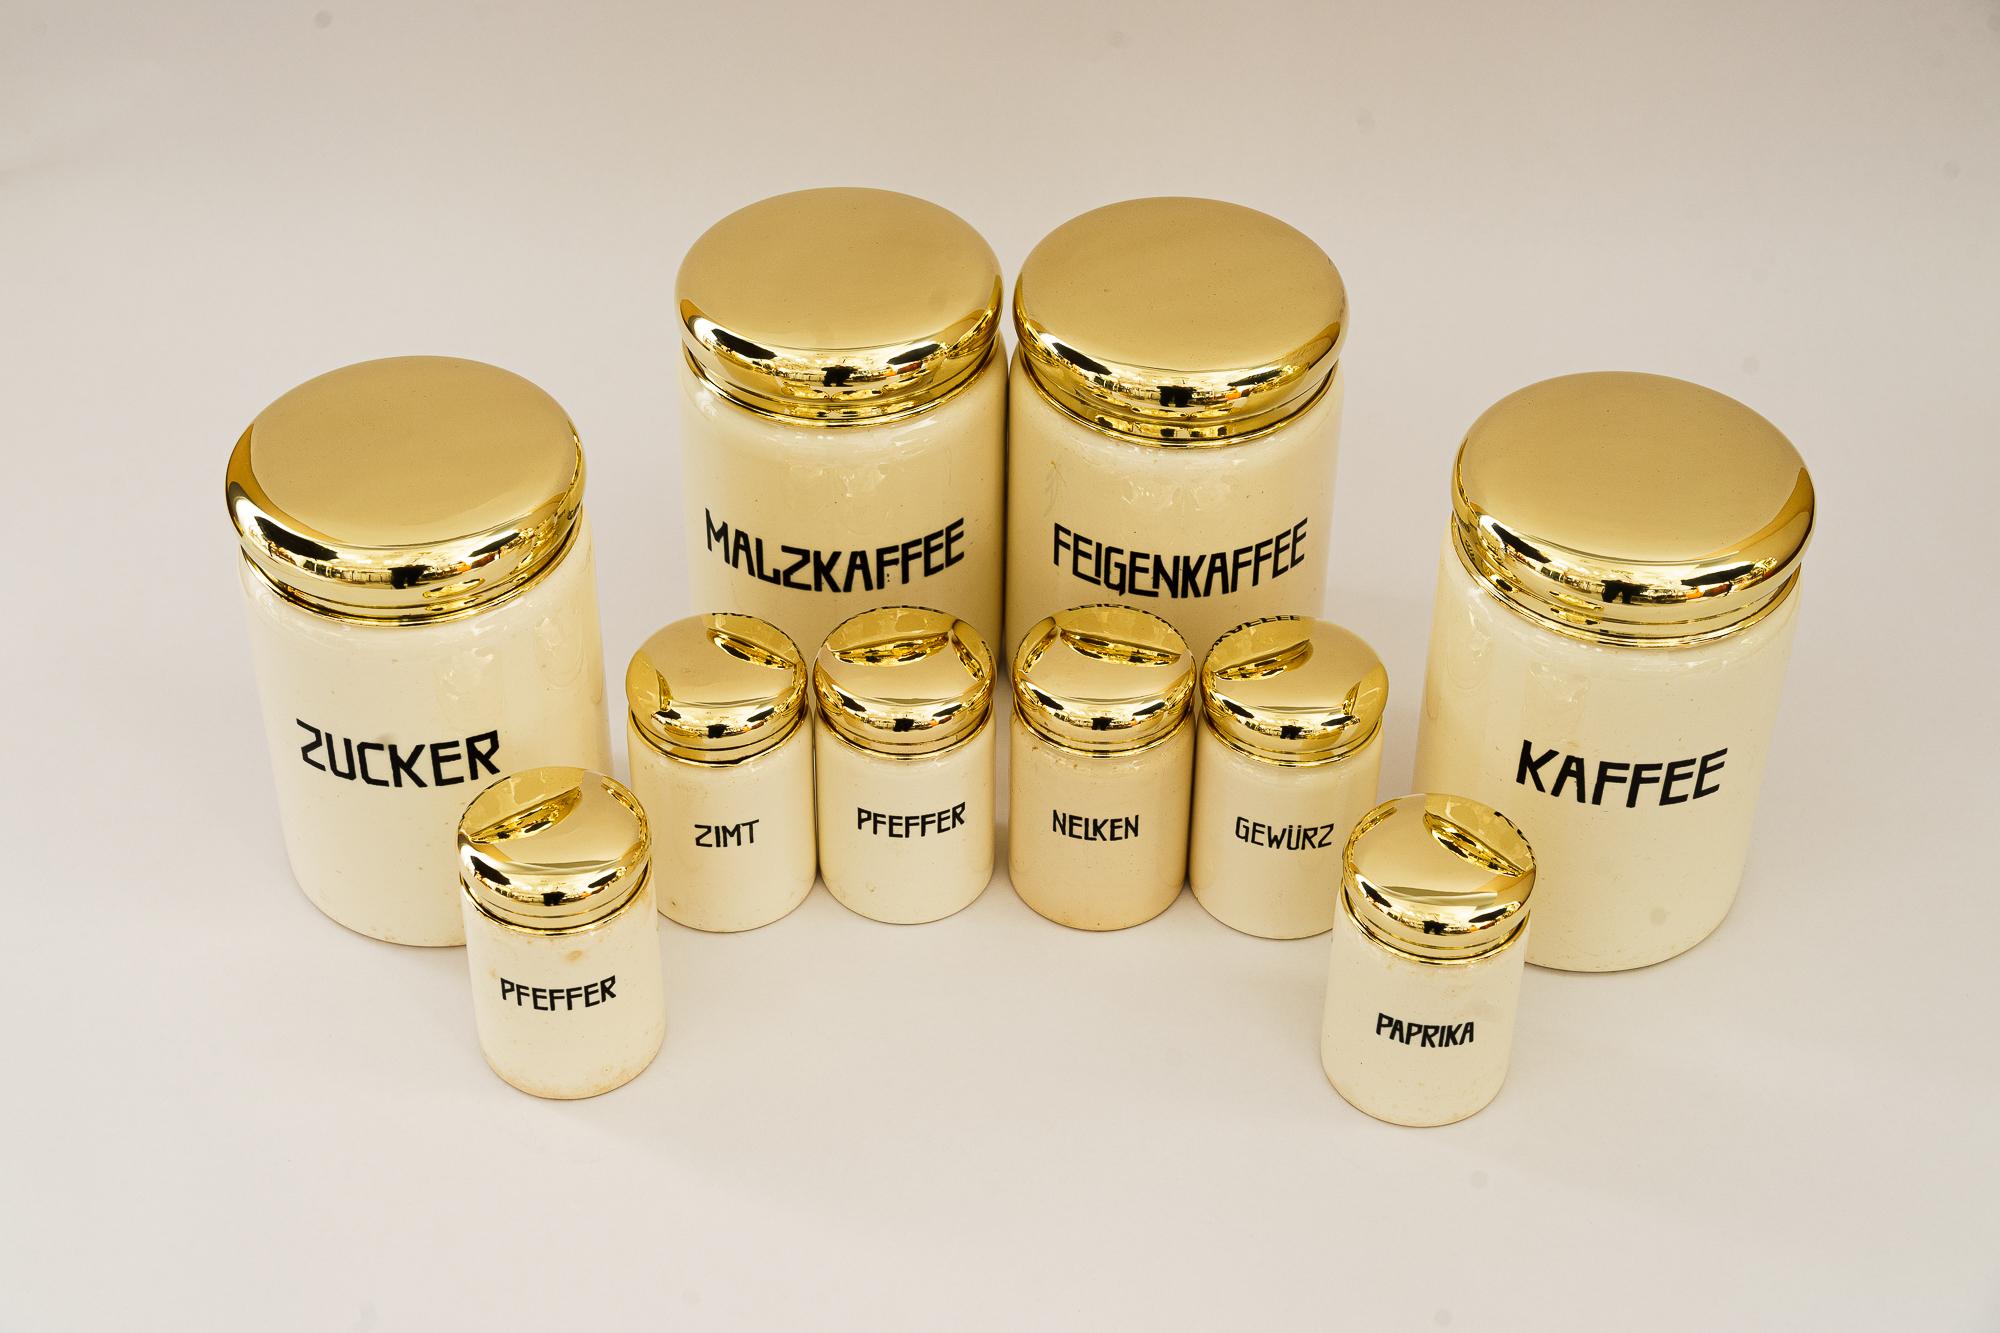 A set of 10 ceramic spice jars vienna around 1930s

4 big one 
H: 15cm 
Diameter: 10cm

6 smaller one 
H: 9cm 
Diameter: 5cm

Brass polished and stove enameled
1 has a little damage see last picture